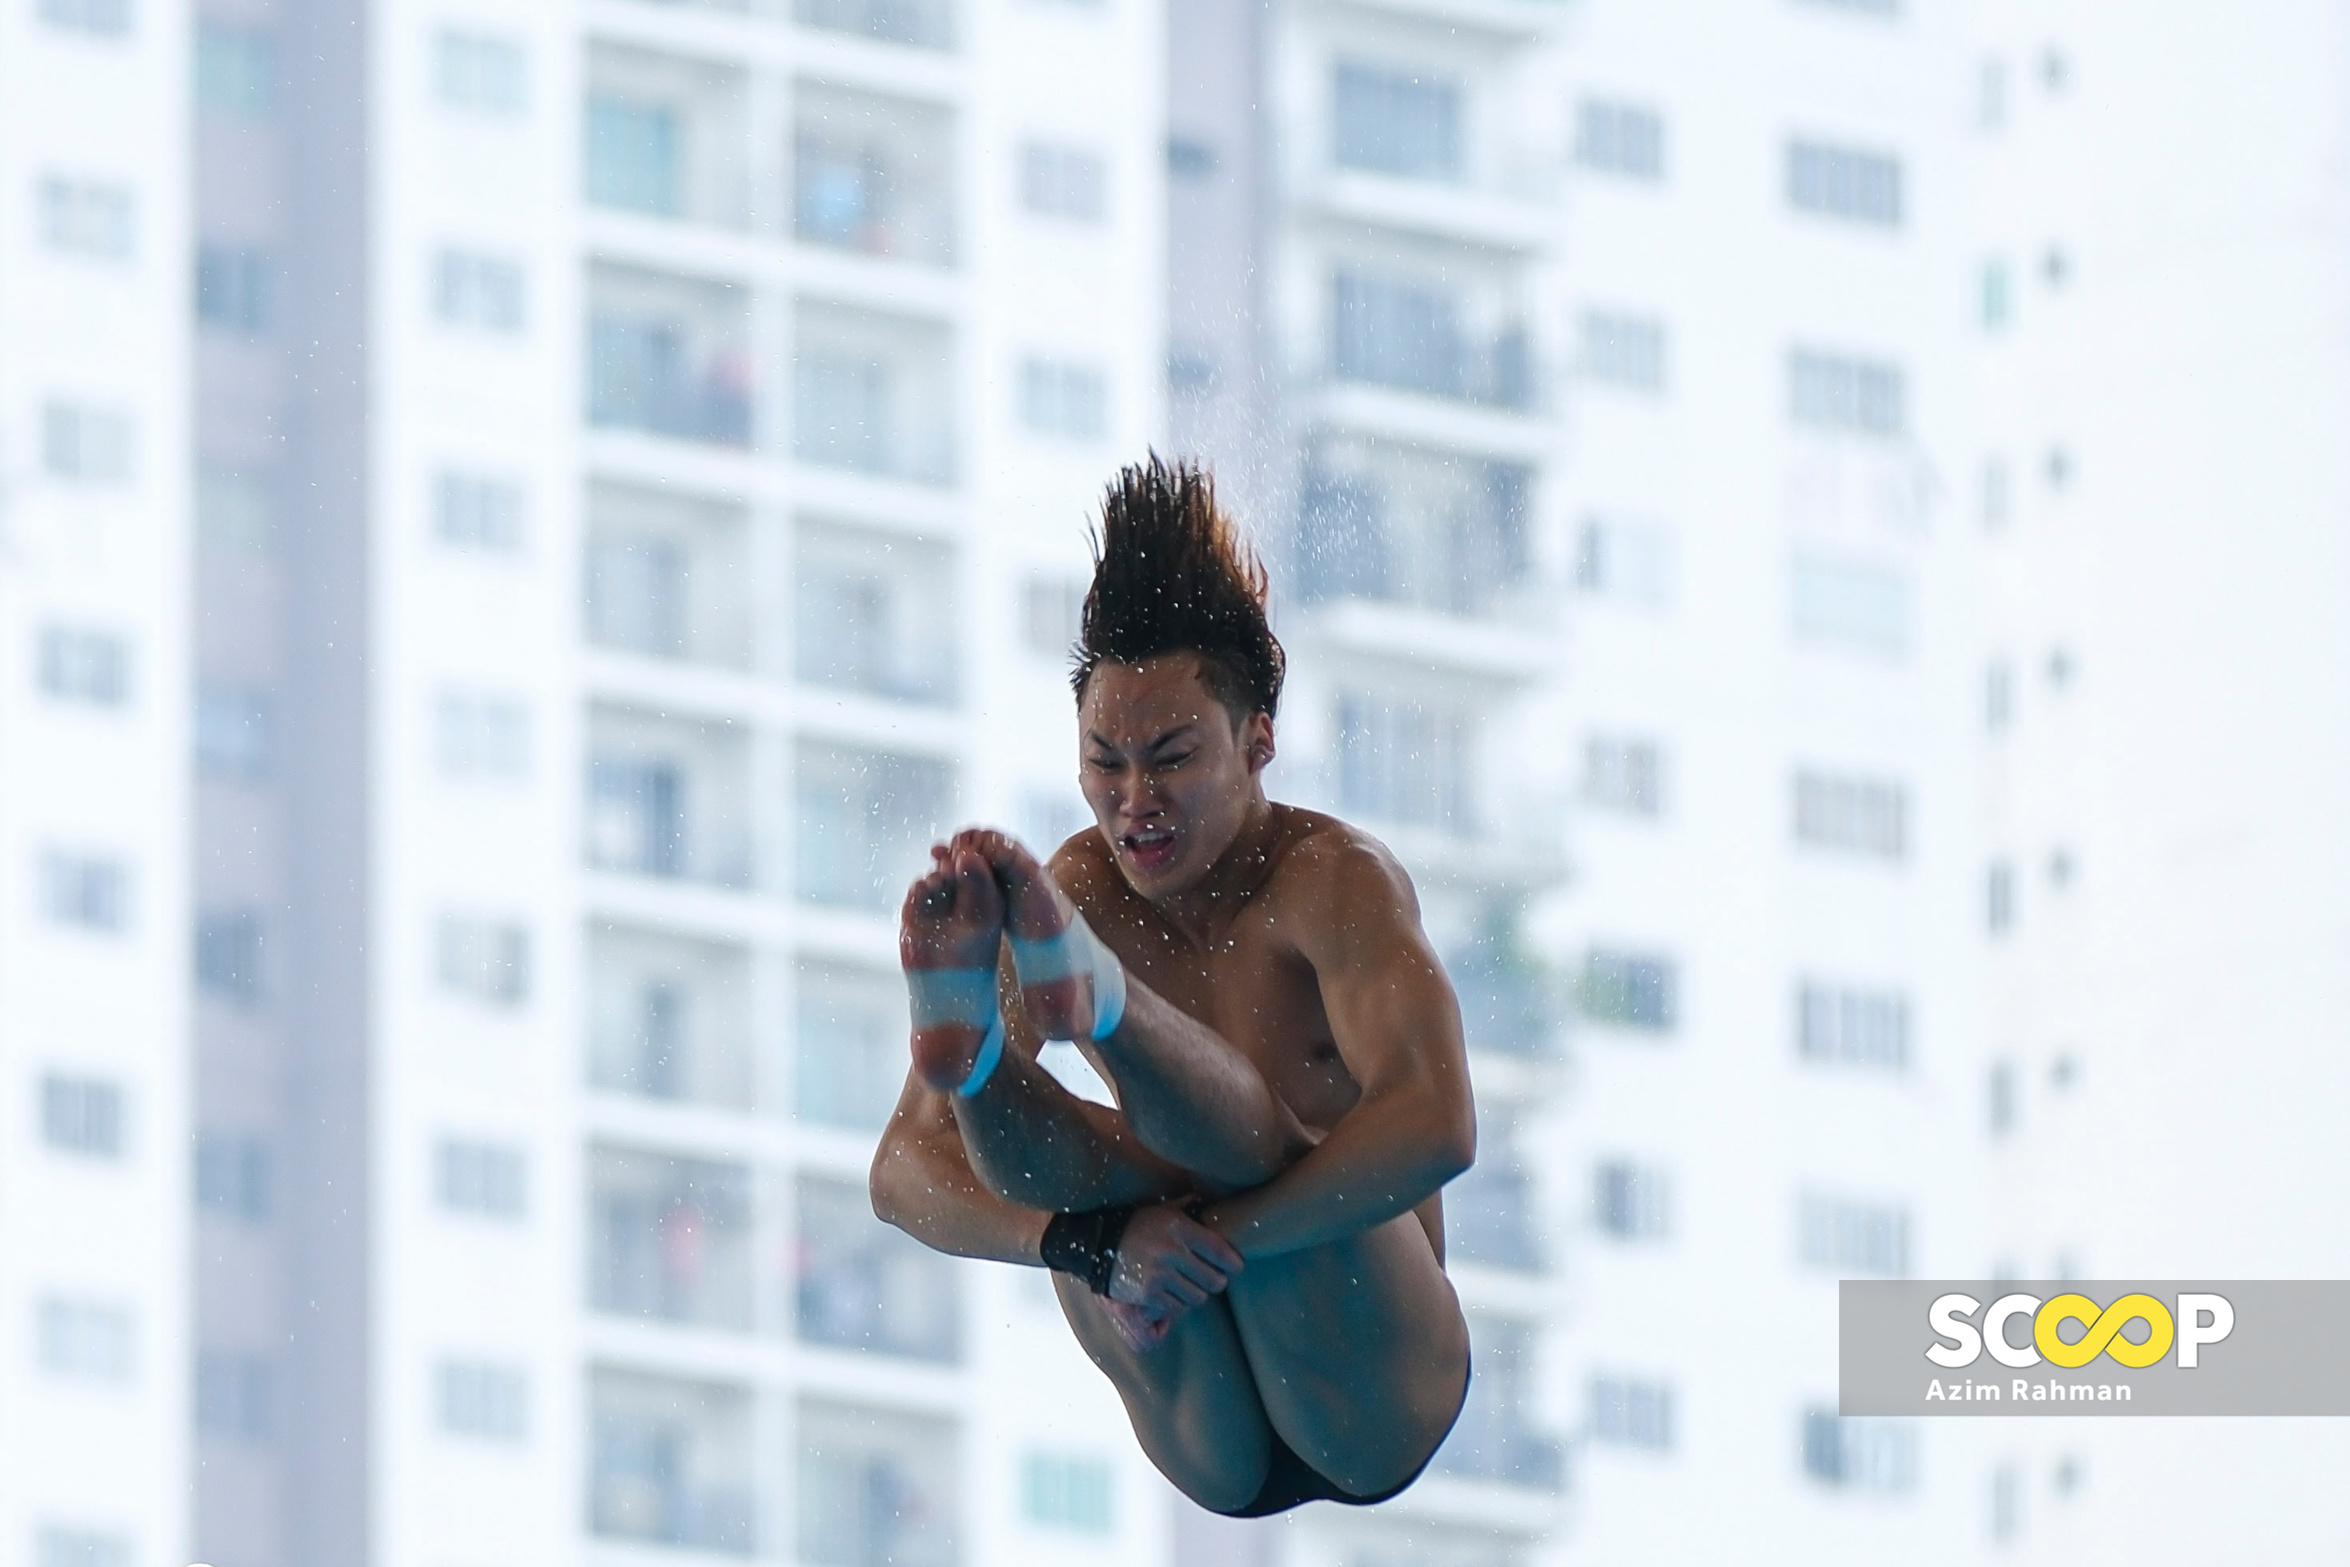 Paris Olympics: Bertrand training in different countries in bid to up difficulty of dives